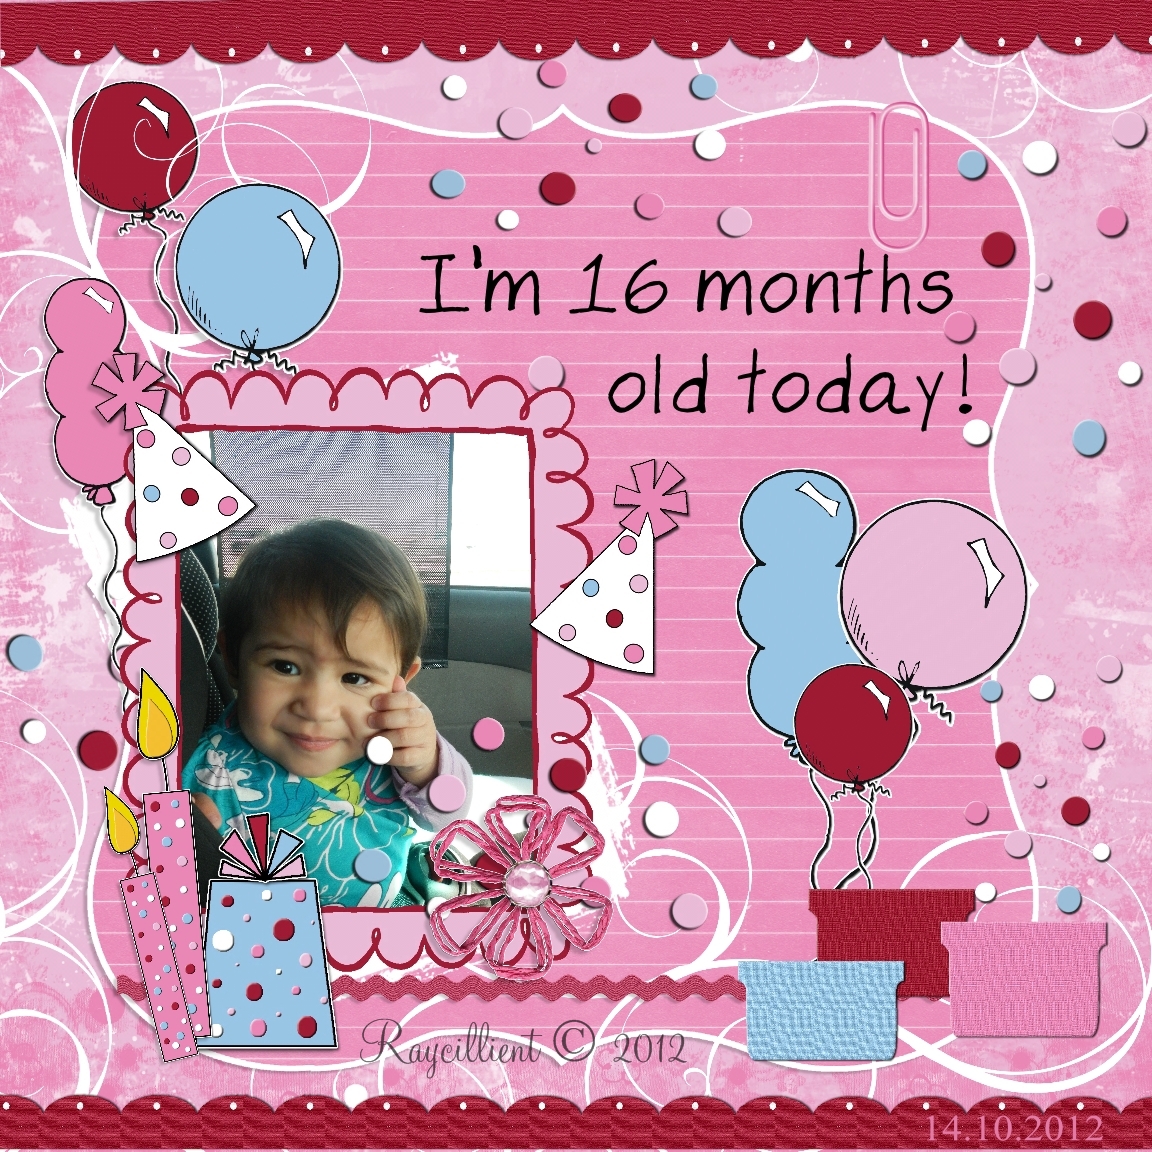 16 Months old today!